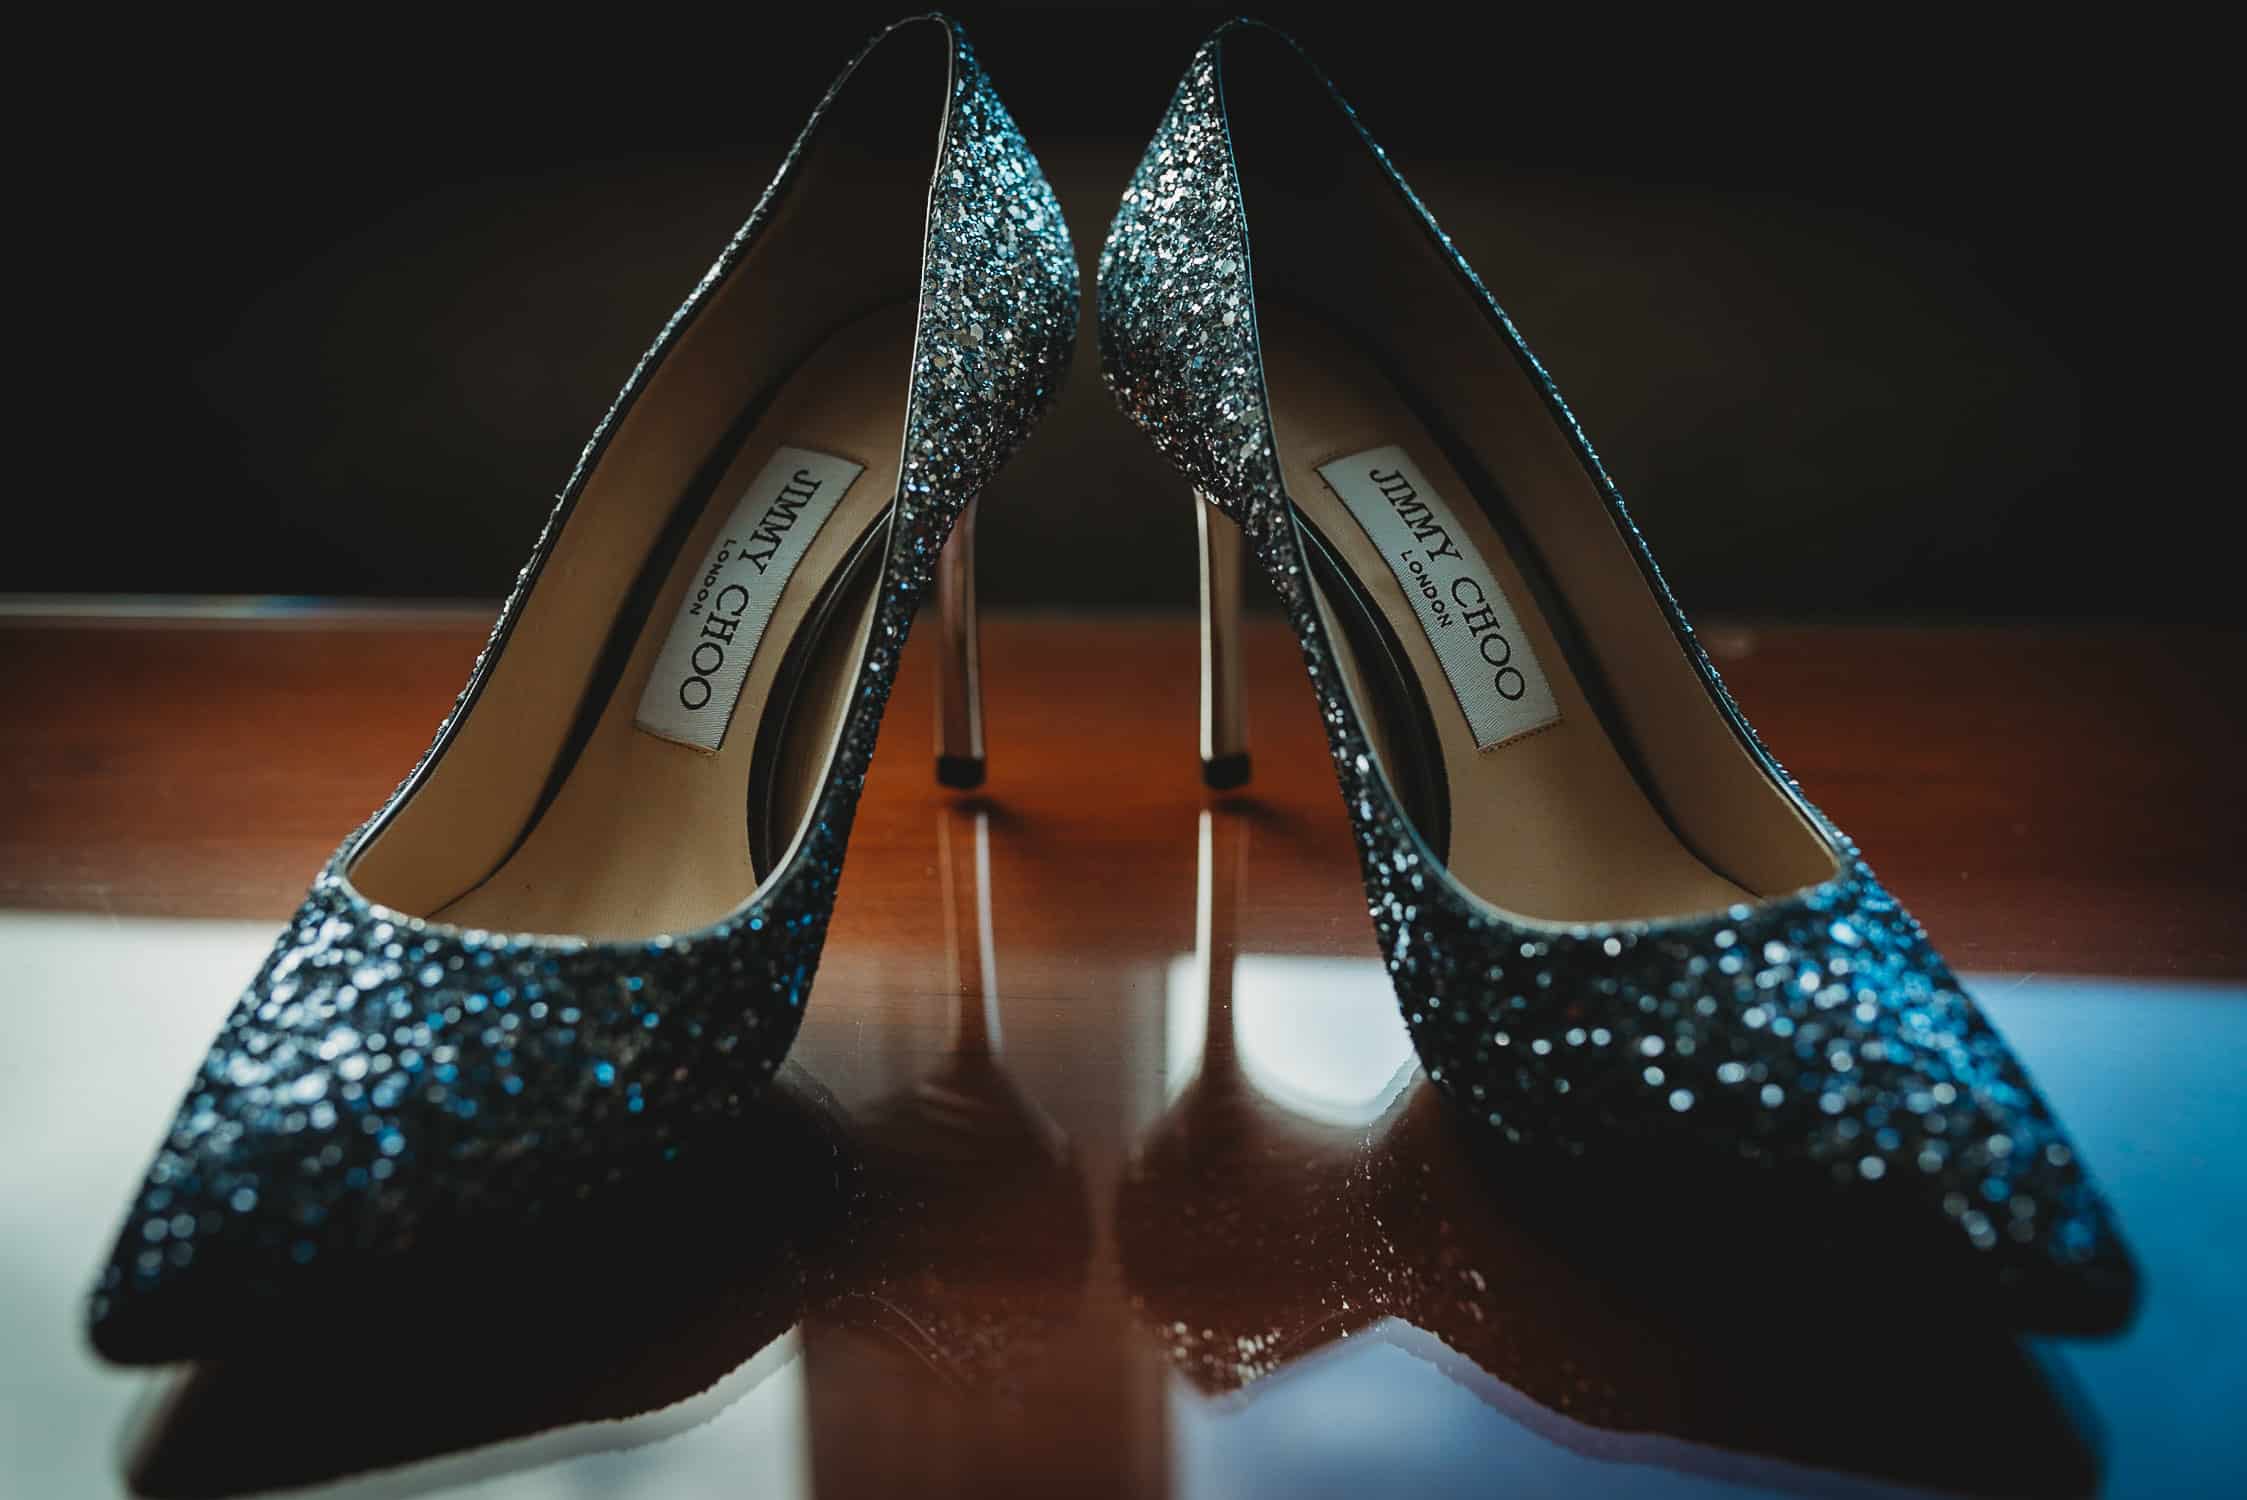 close-up of shiny Jimmy Choo shoes on a glass table